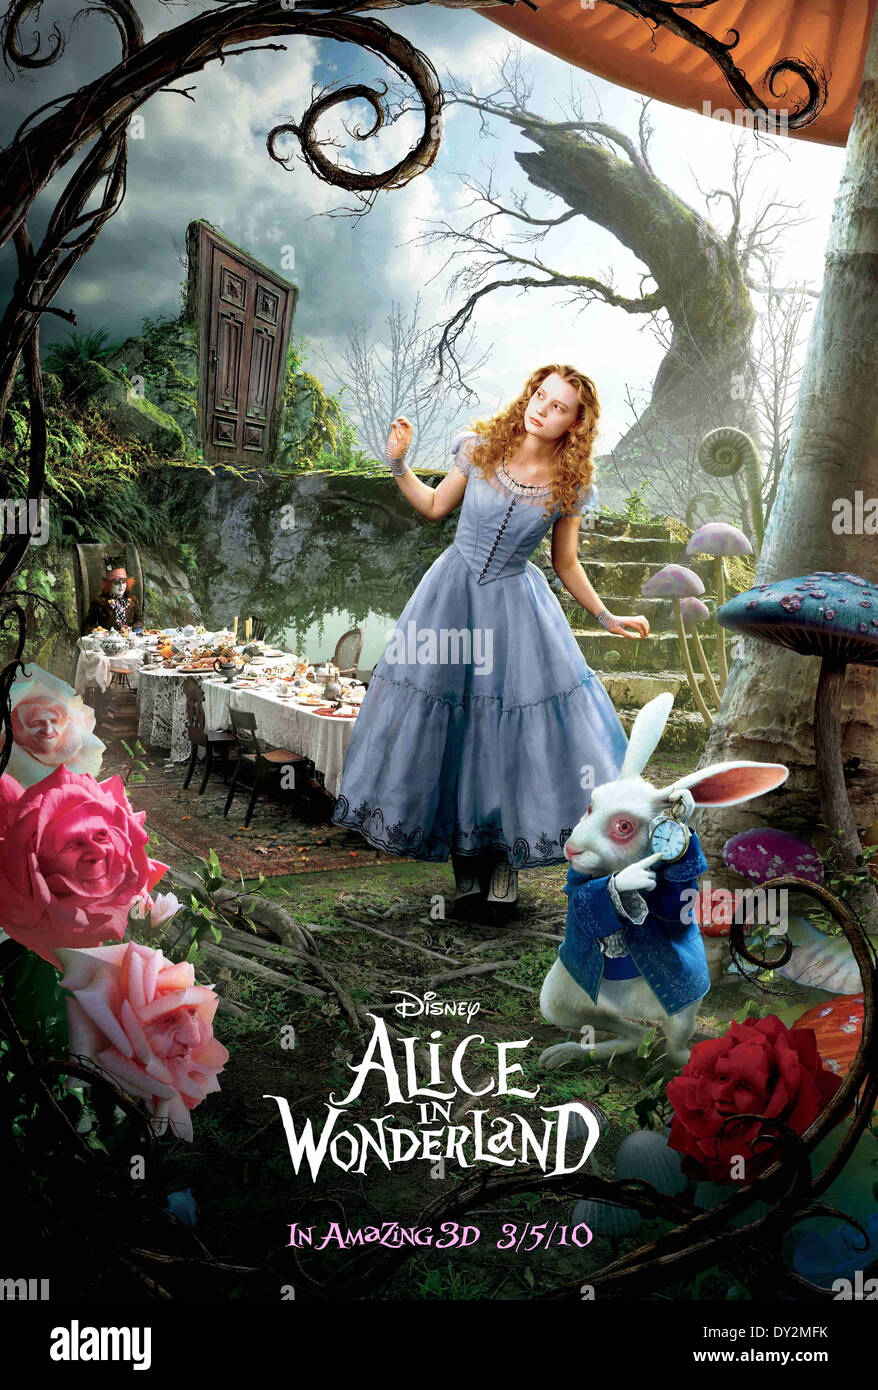 Alice in wonderland film poster hi-res stock photography and images - Alamy